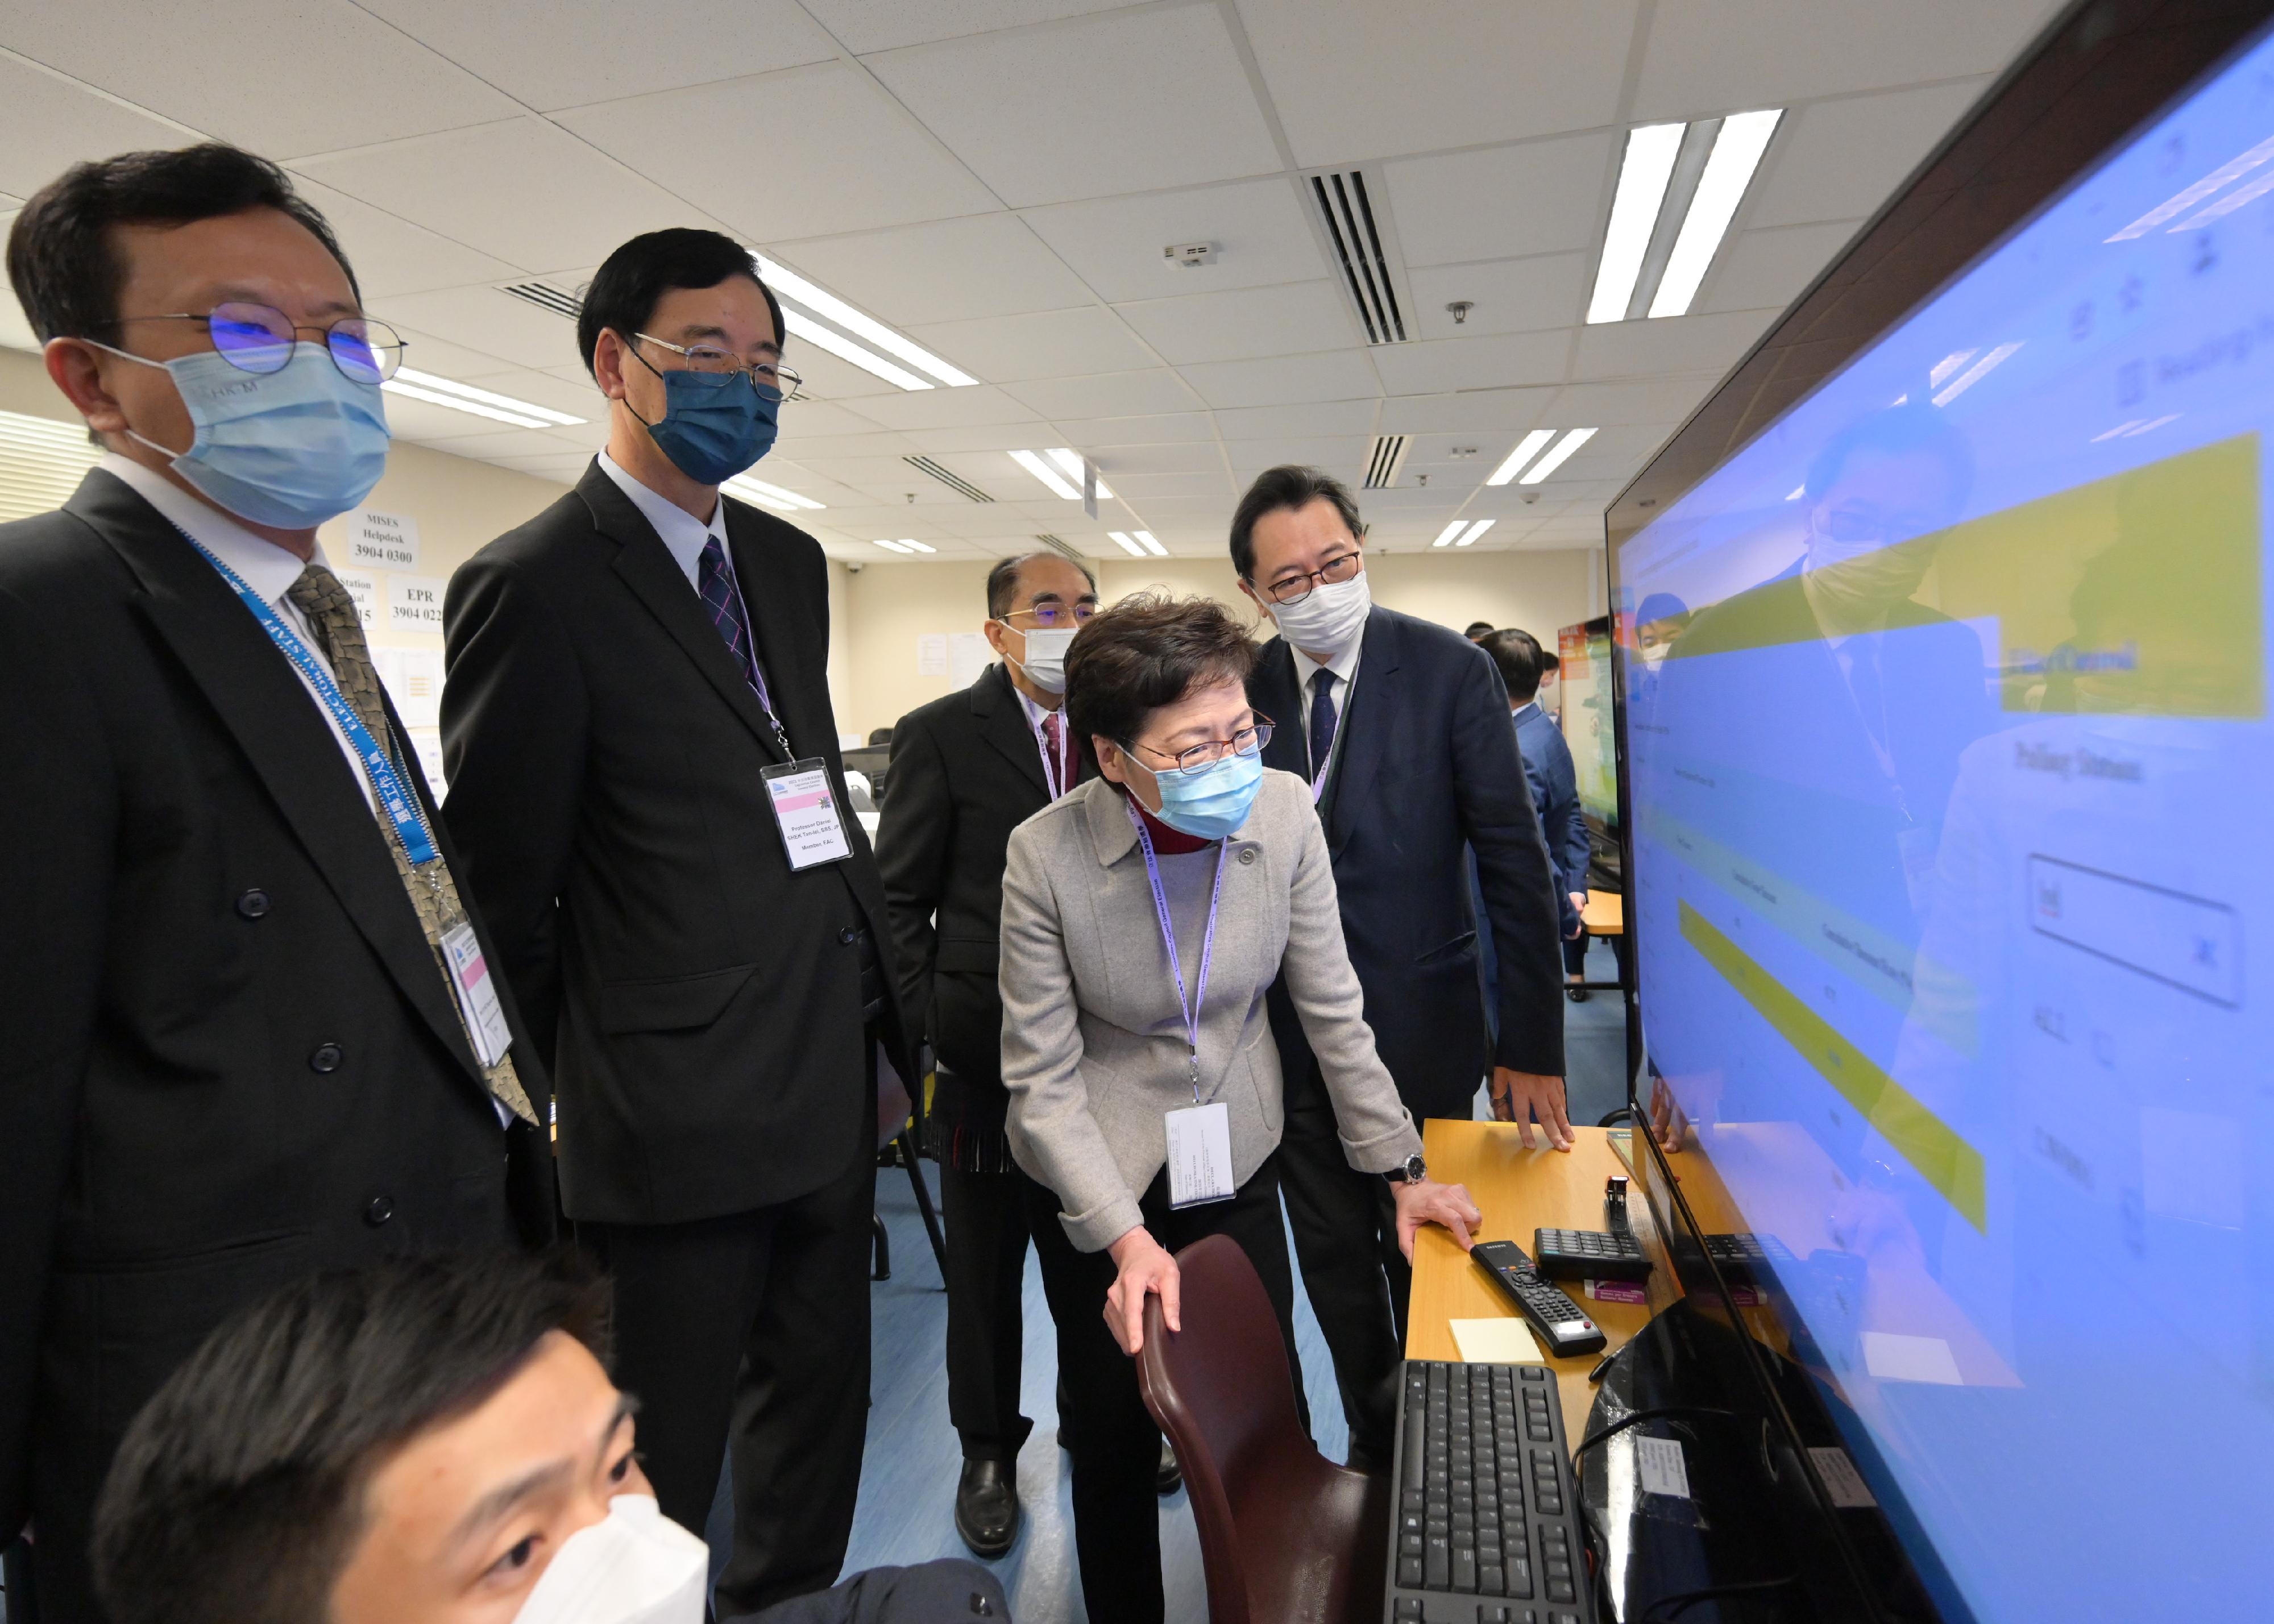 The Chief Executive, Mrs Carrie Lam (second right), accompanied by the Chairman of the Electoral Affairs Commission, Mr Justice Barnabas Fung Wah (first right), visits the Central Command Centre of the 2021 Legislative Council General Election this morning (December 19) to inspect its operation.